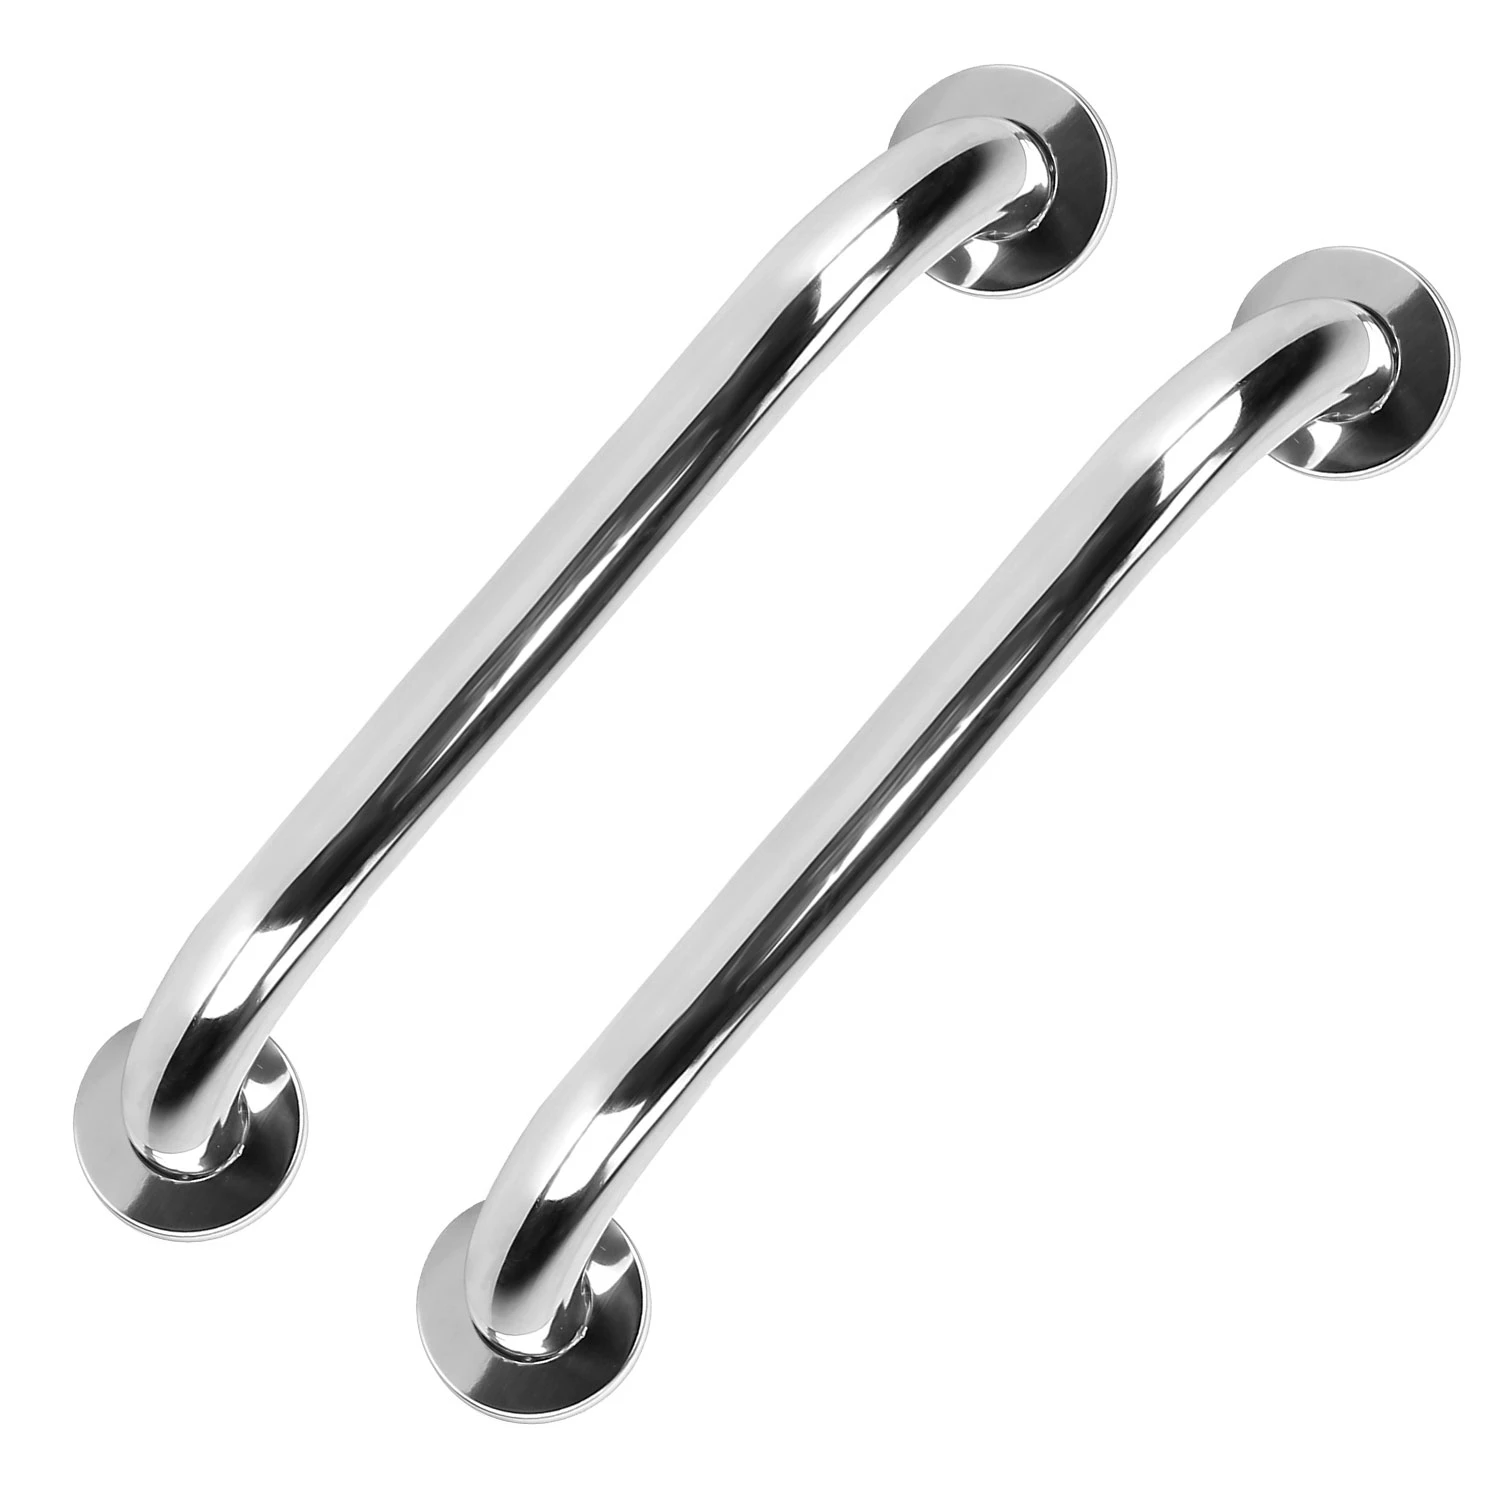 2Pcs Bath Grab Bar 11.8in Sturdy Stainless Steel Shower Safety Handle For Bathtub Toilet Stairway